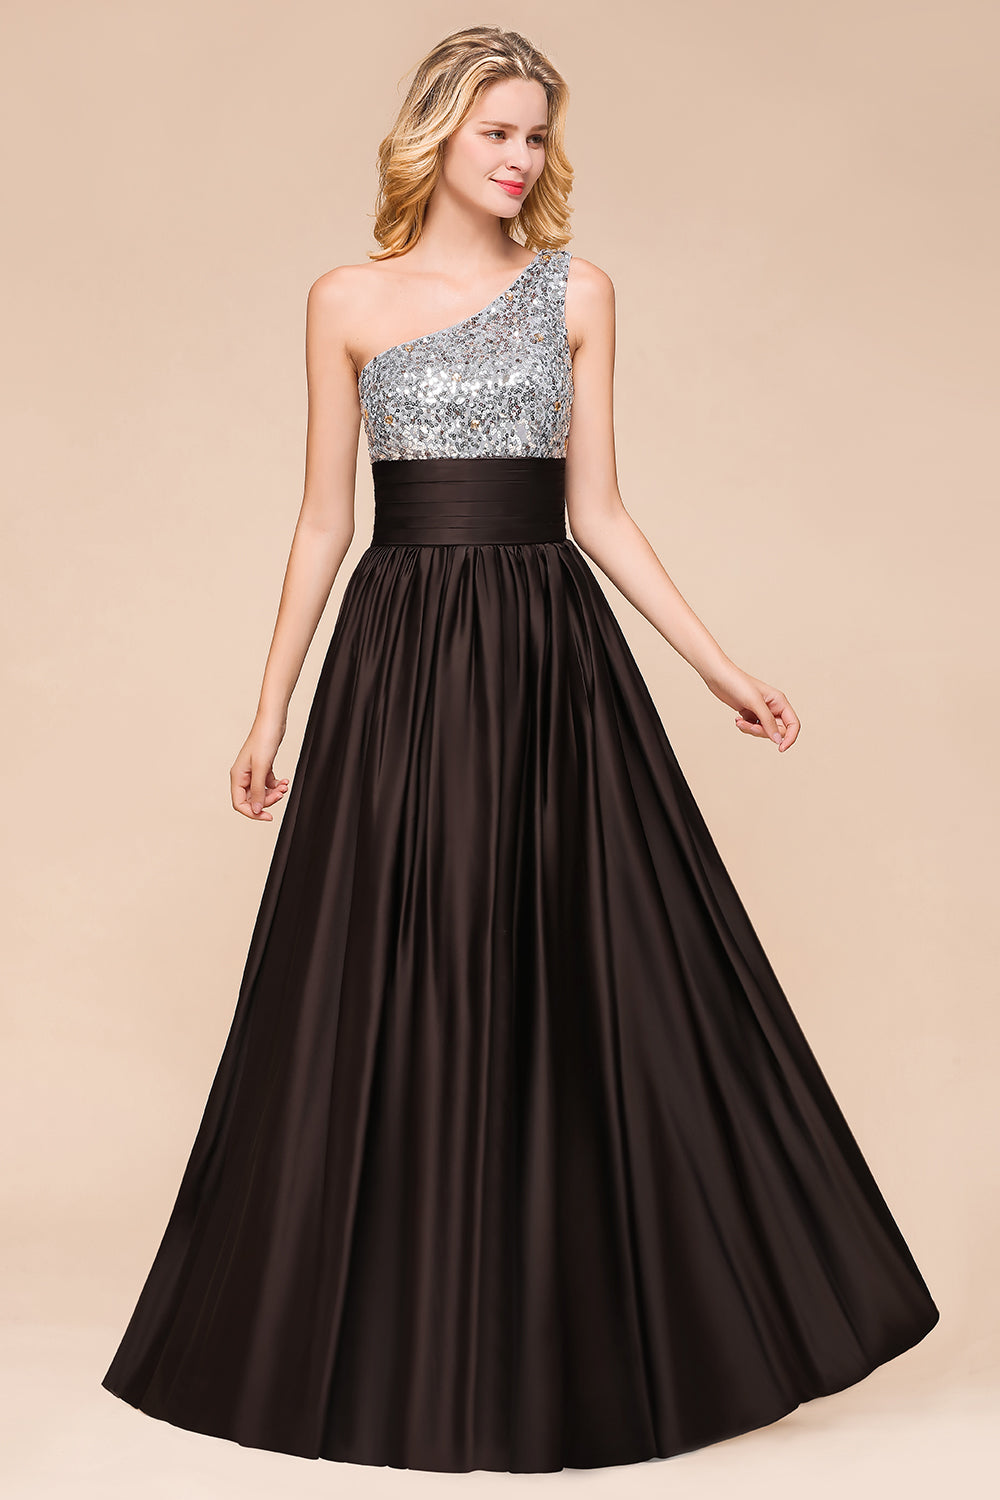 Gorgeous Long A-line One Shoulder Chiffon Bridesmaid Dress With Sequins-BIZTUNNEL